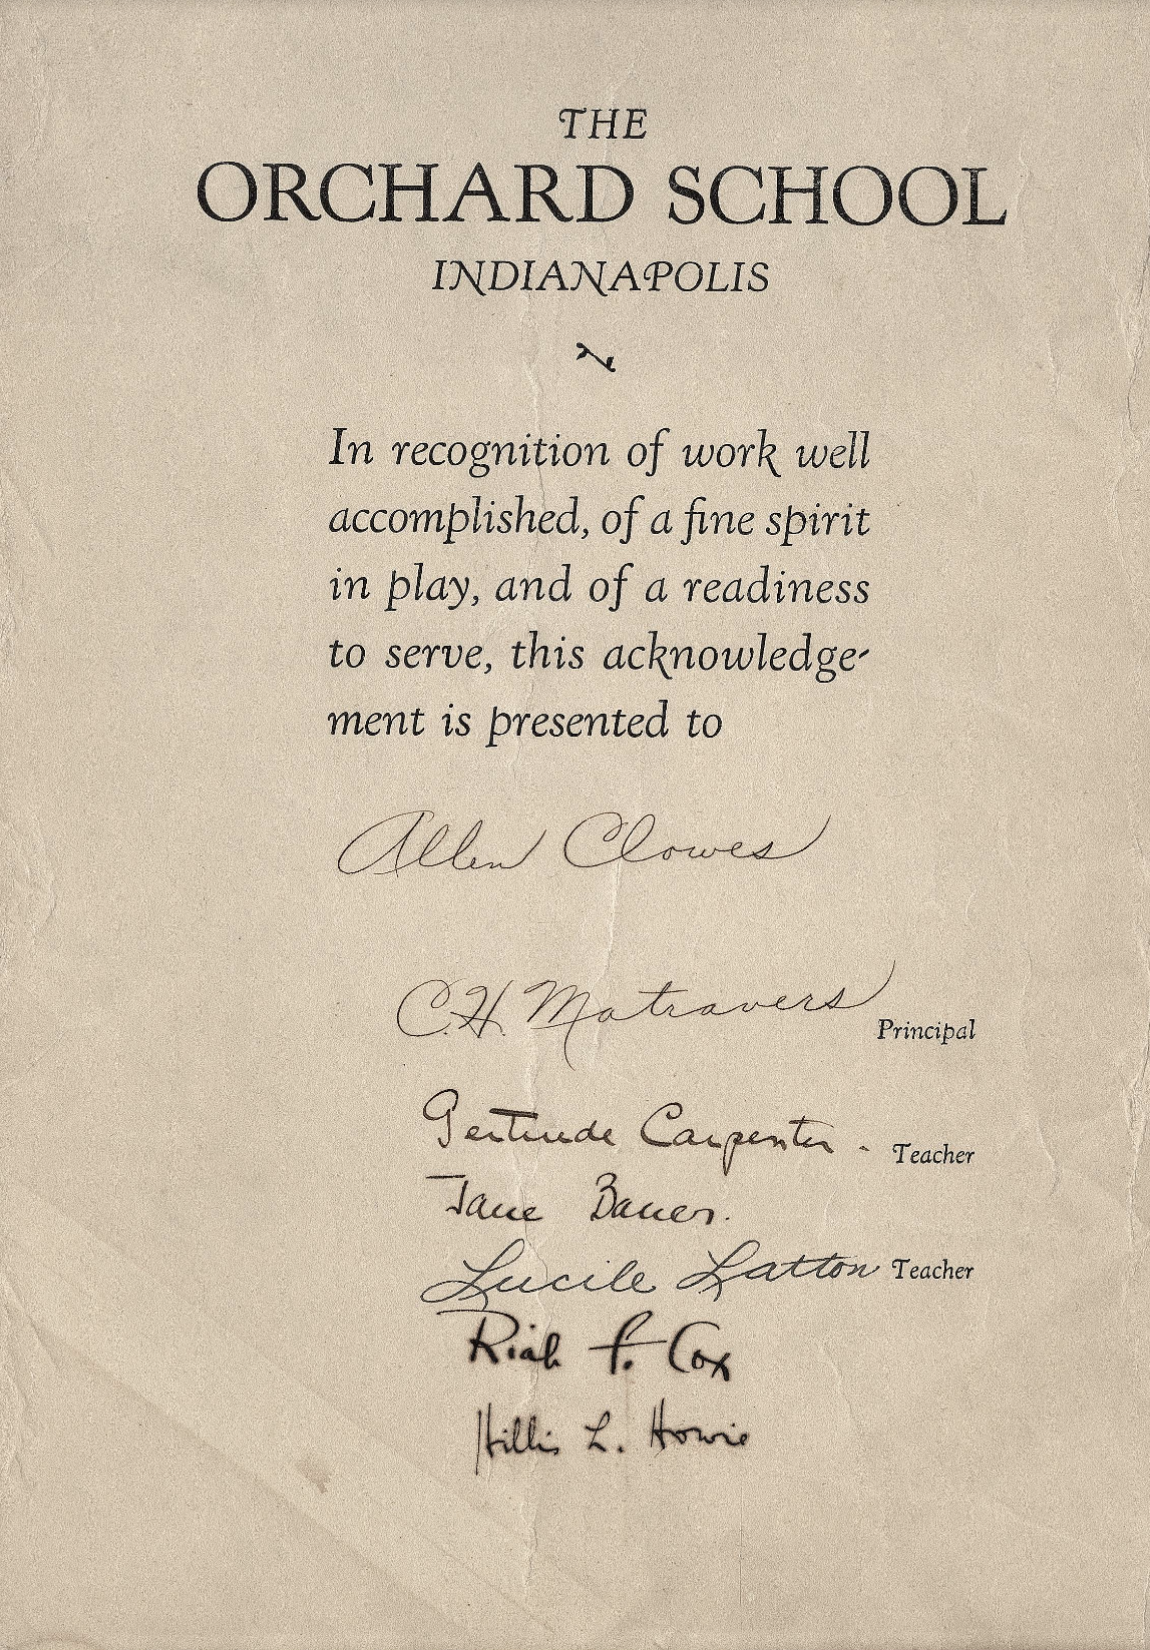 A document that reads "In recognition of work well accomplished, of a fine spirit in play, and of a readiness to serve, this acknowledgement is presented to" with a series of signatures below it. 